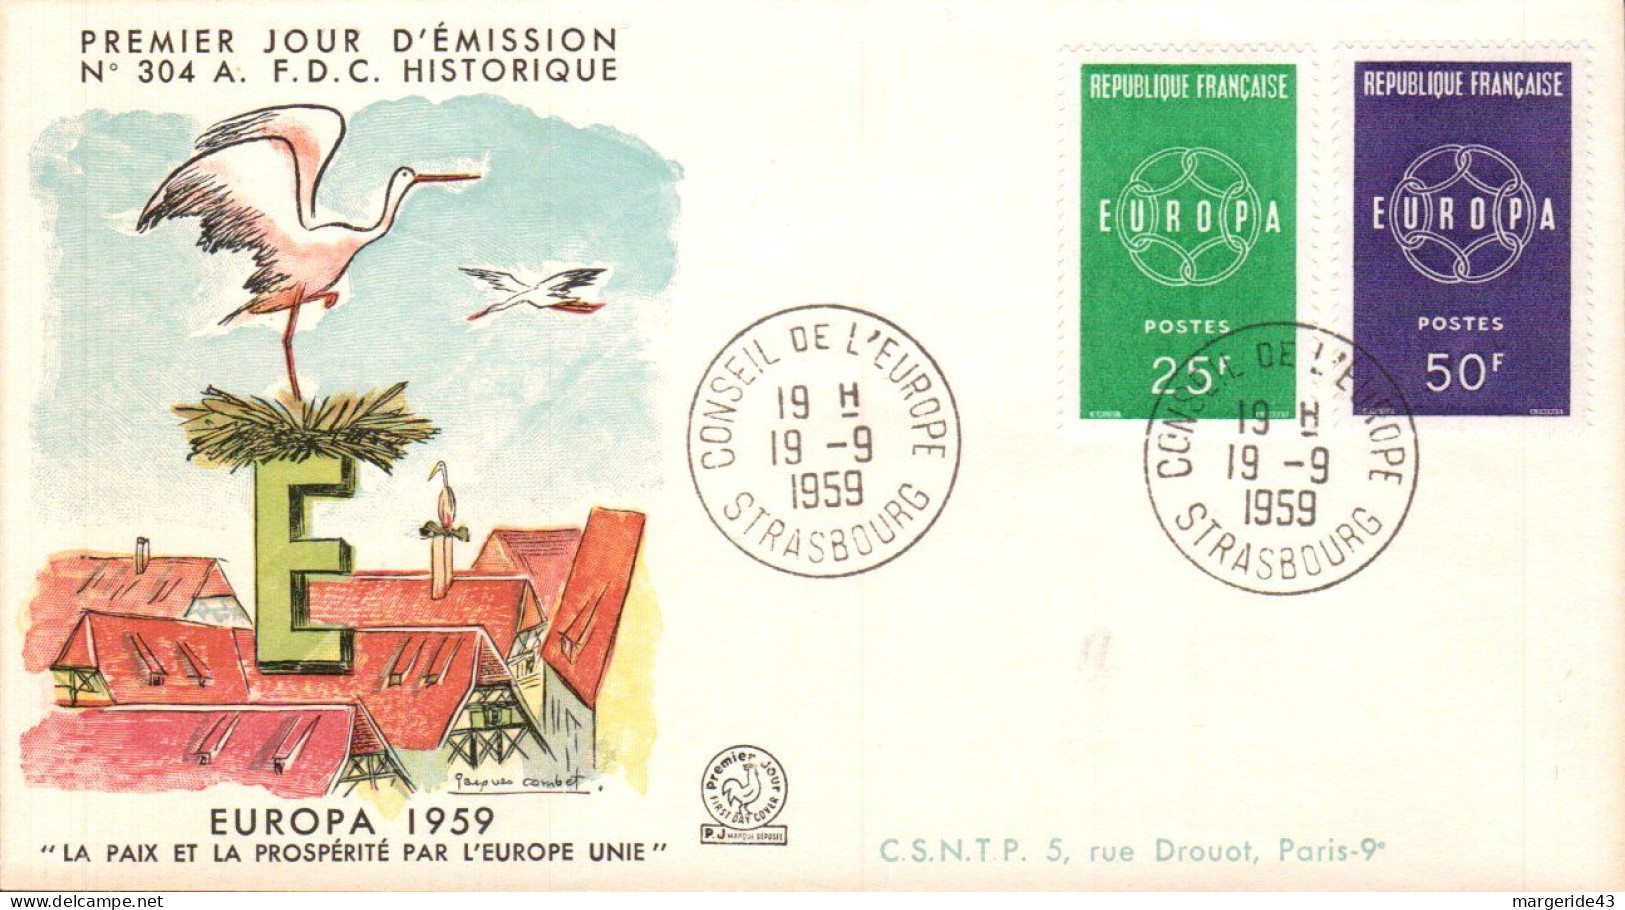 EUROPA 1959 FRANCE FDC - 1959